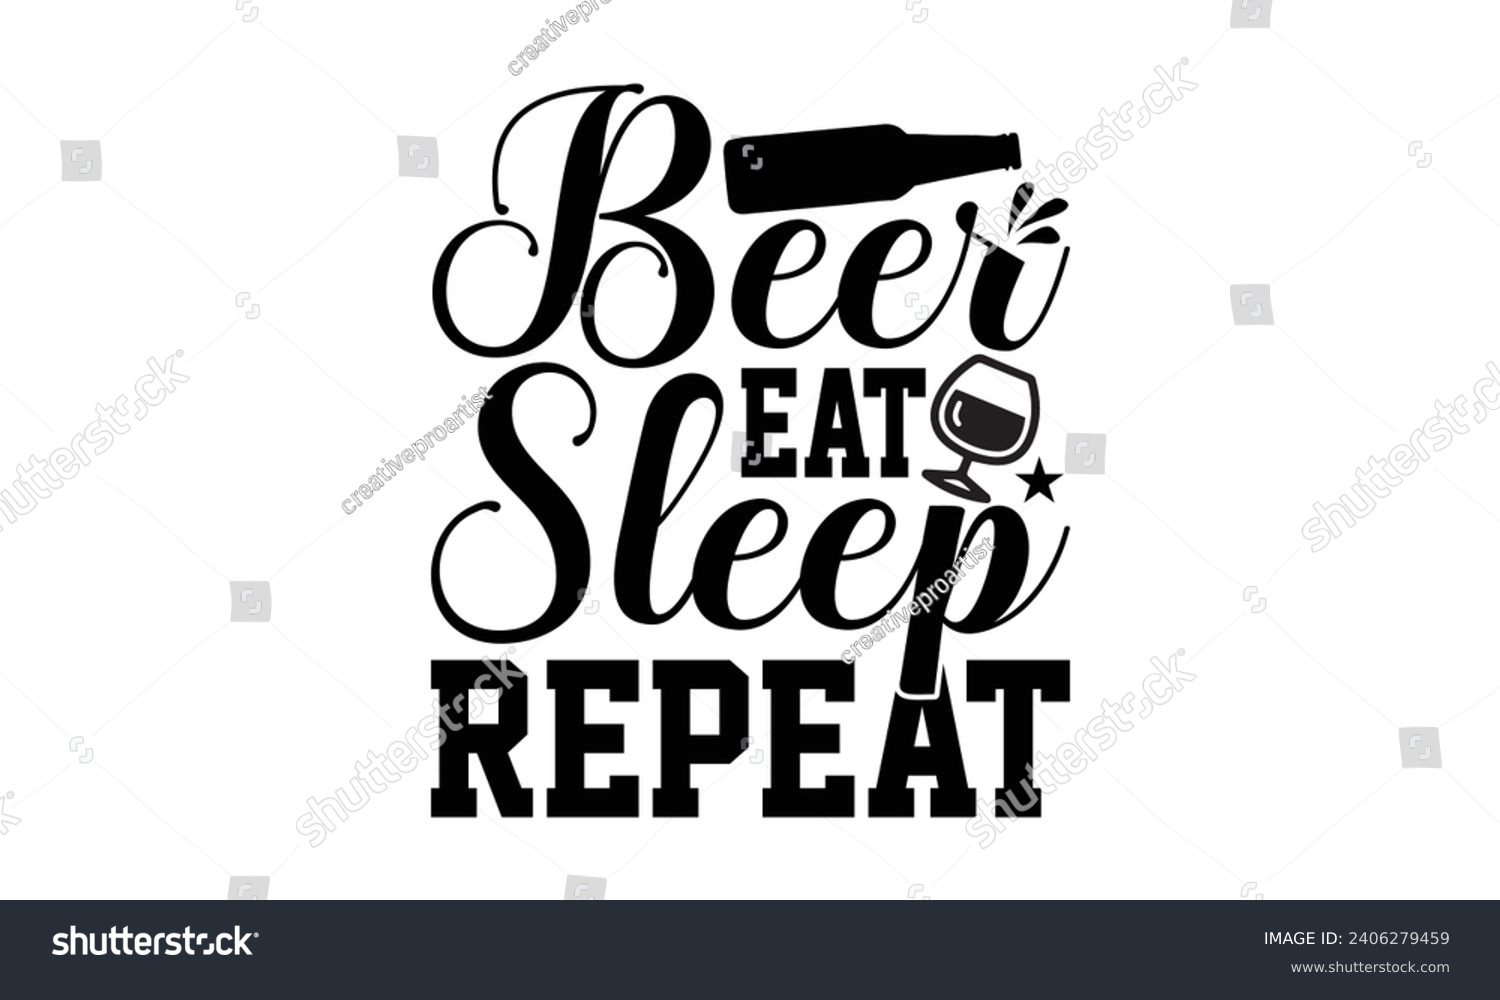 SVG of Beer Eat Sleep Repeat- Beer t- shirt design, Handmade calligraphy vector illustration for Cutting Machine, Silhouette Cameo, Cricut, Vector illustration Template. svg